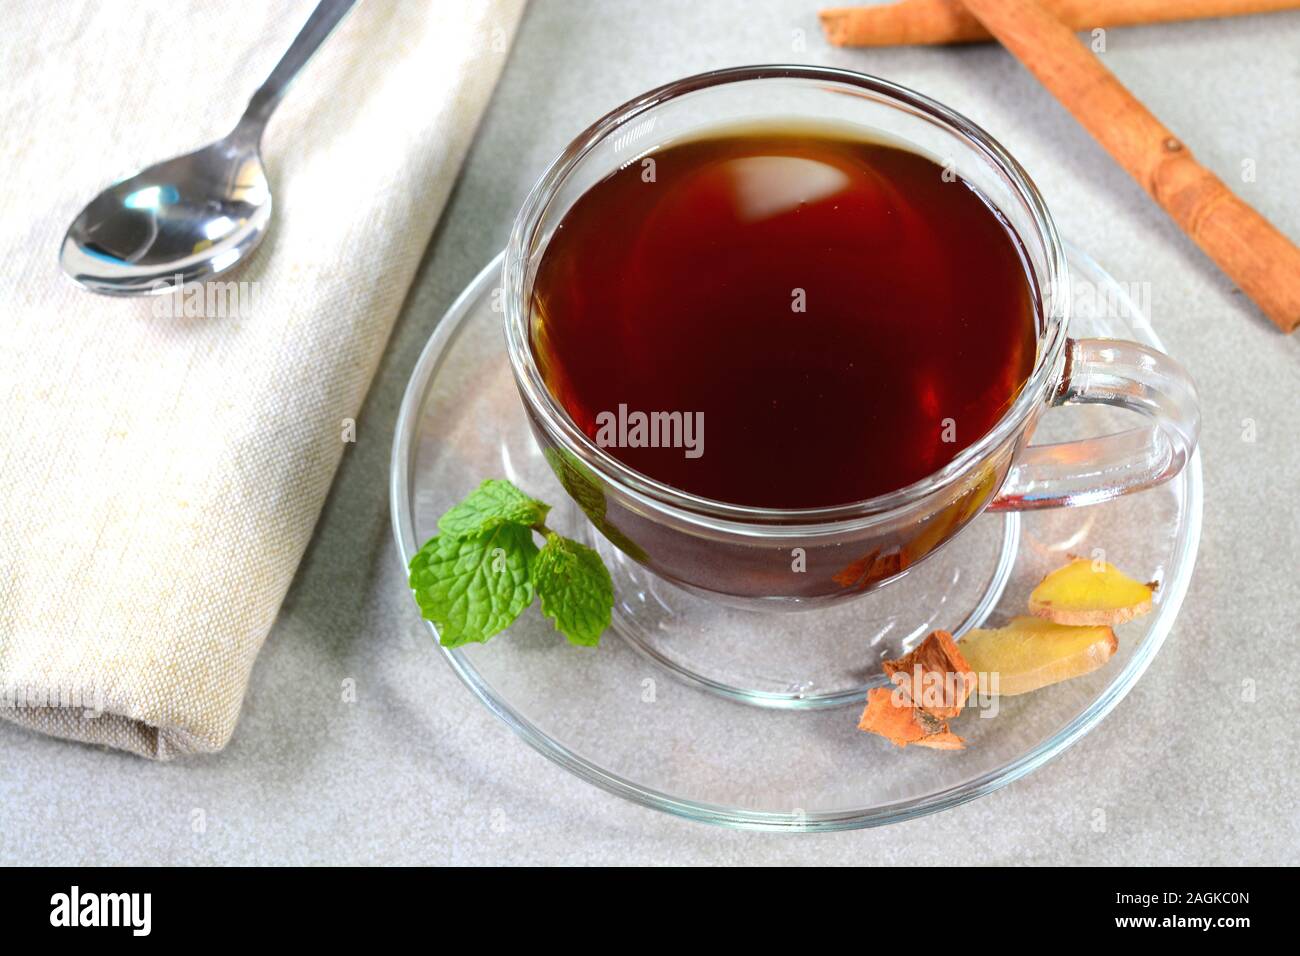 Ginger cinnamon mint tea served in glass tea cup Stock Photo